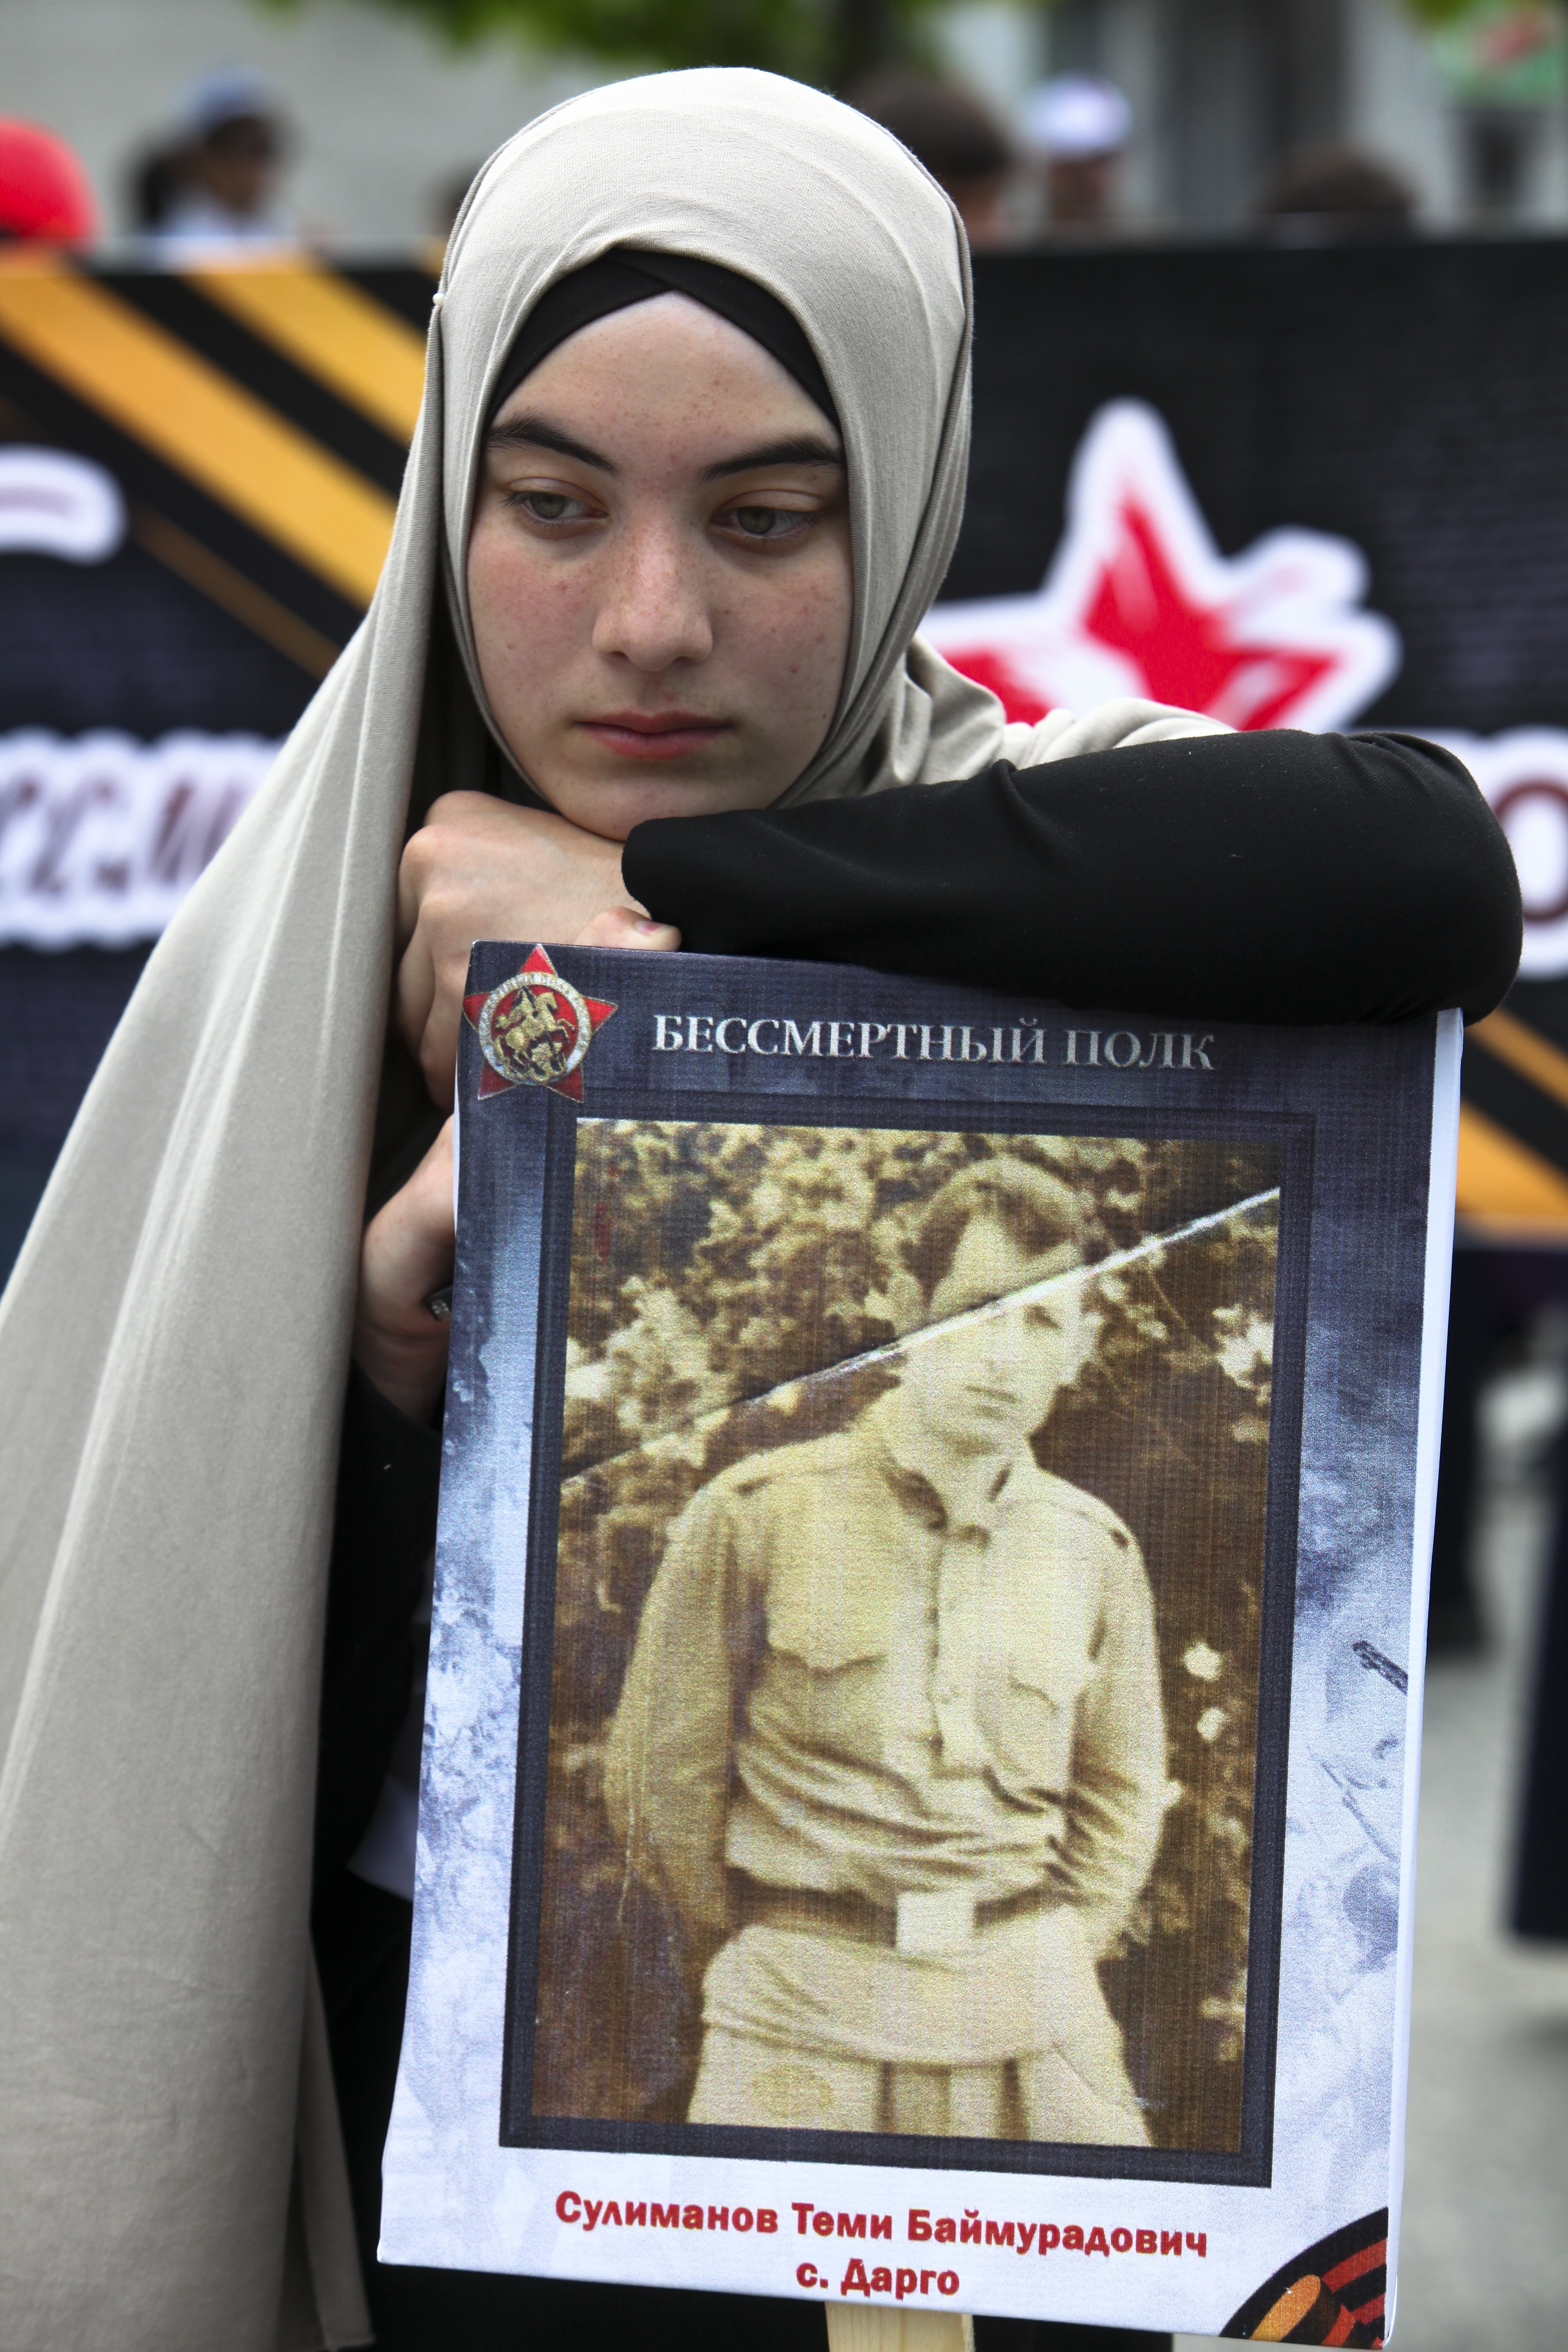 A Chechen woman holds a portrait of her relative who fought in World War II, prior to the Immortal Regiment march in the Chechnya's capital Grozny, southern Russia, Tuesday, May 9, 2017, celebrating 72 years since the end of WWII and the defeat of Nazi Germany. (AP Photo/Musa Sadulayev)